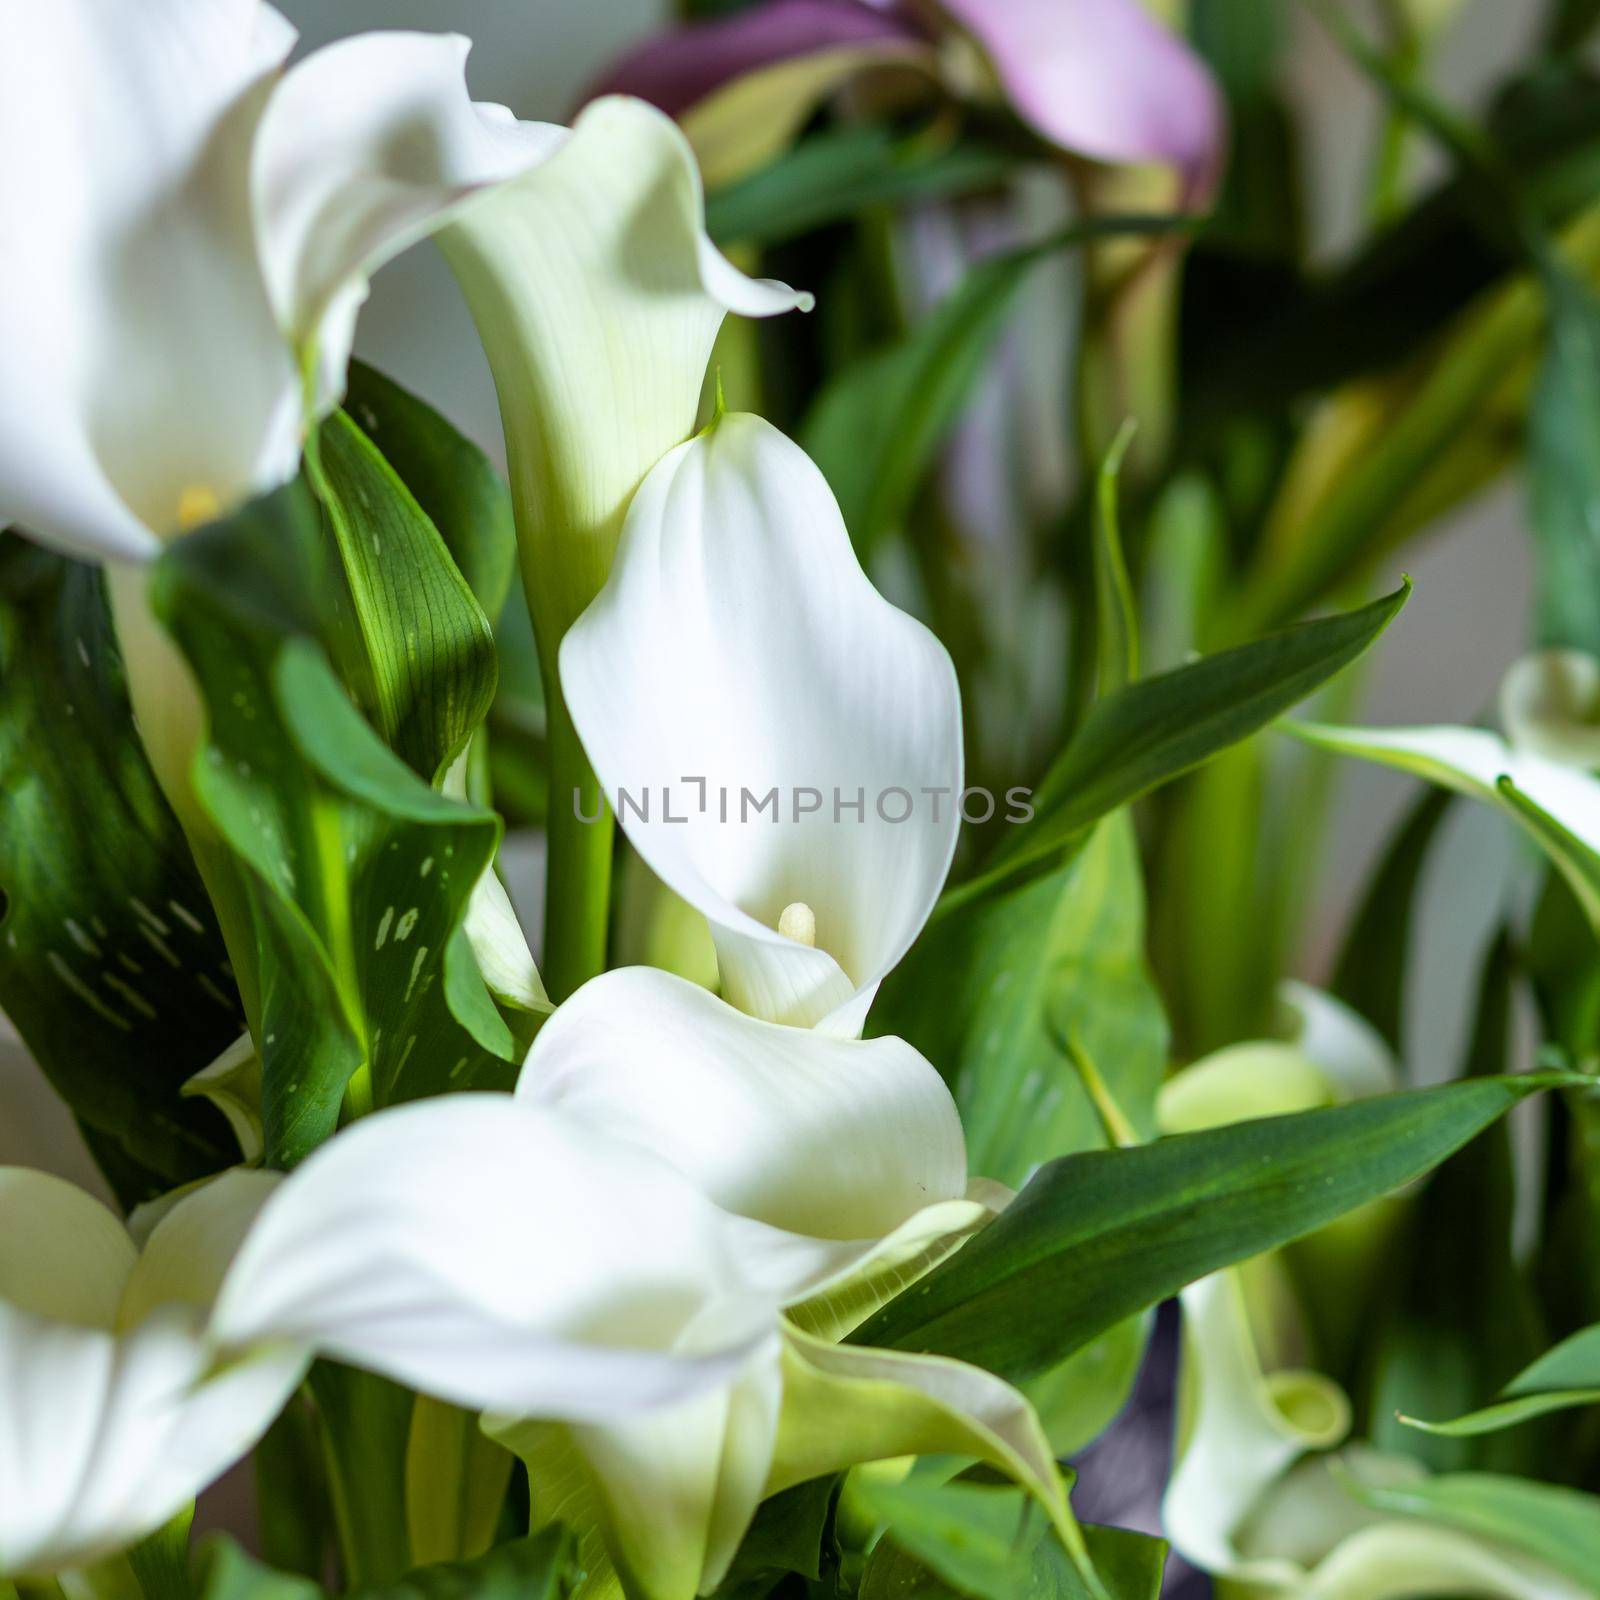 Arum lily flower plant close up by ferhad